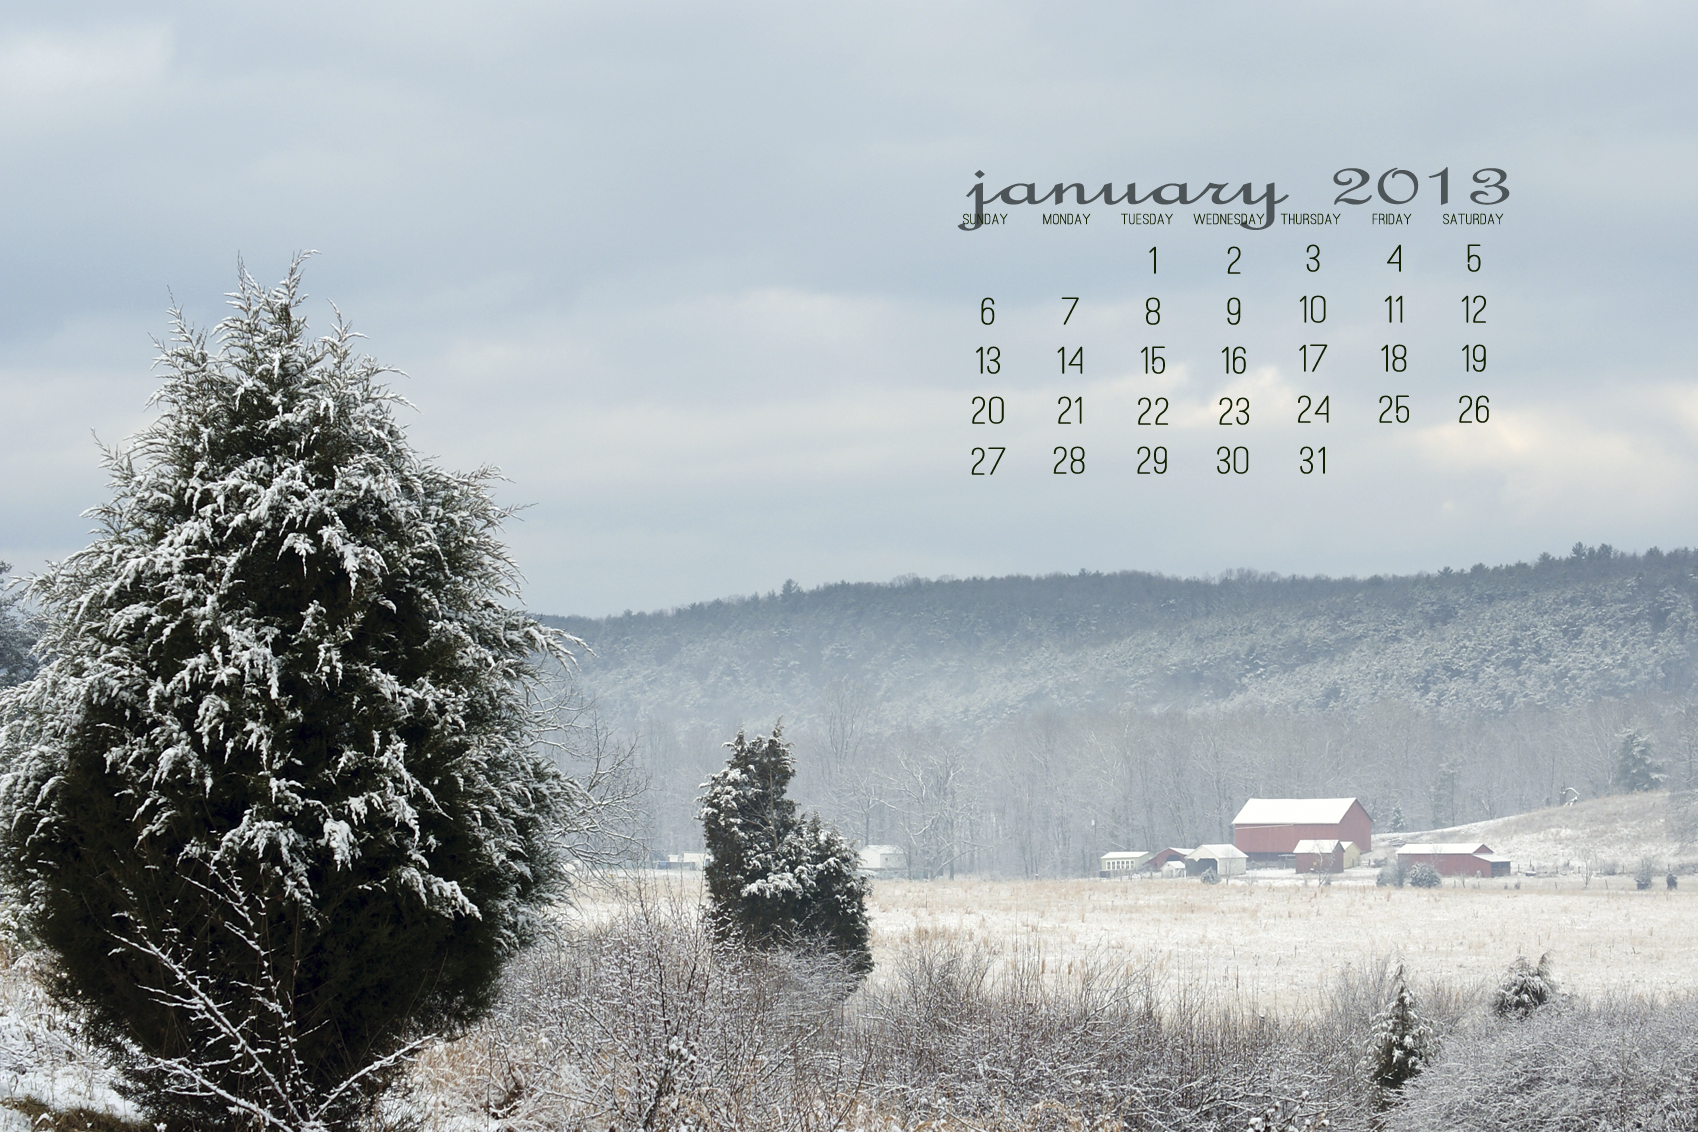 January 2013 Calendar   Wallpapers Pictures Pics Photos Images